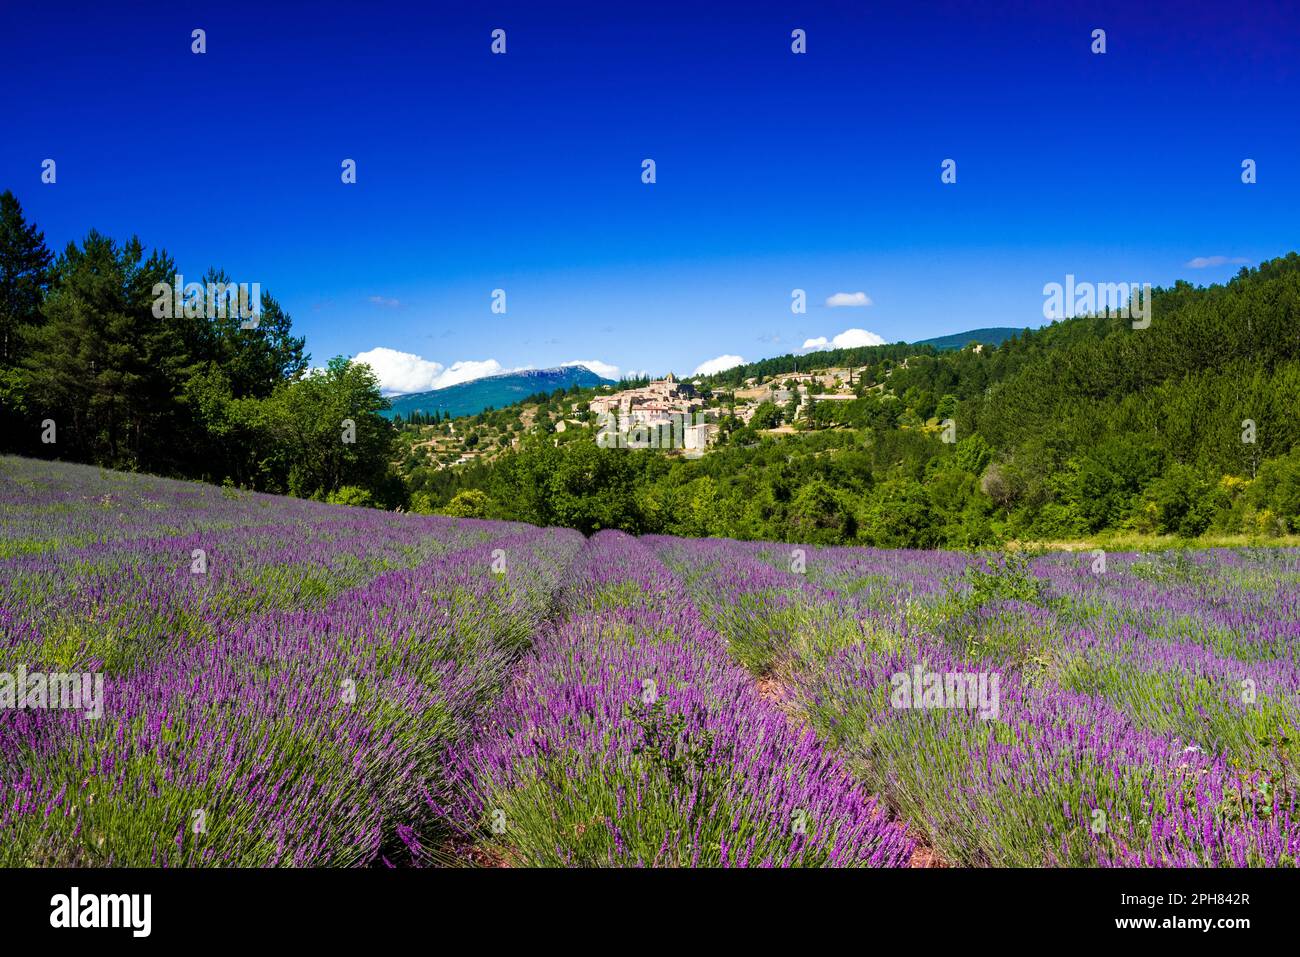 Aurel village and lavender fields in south of France Stock Photo